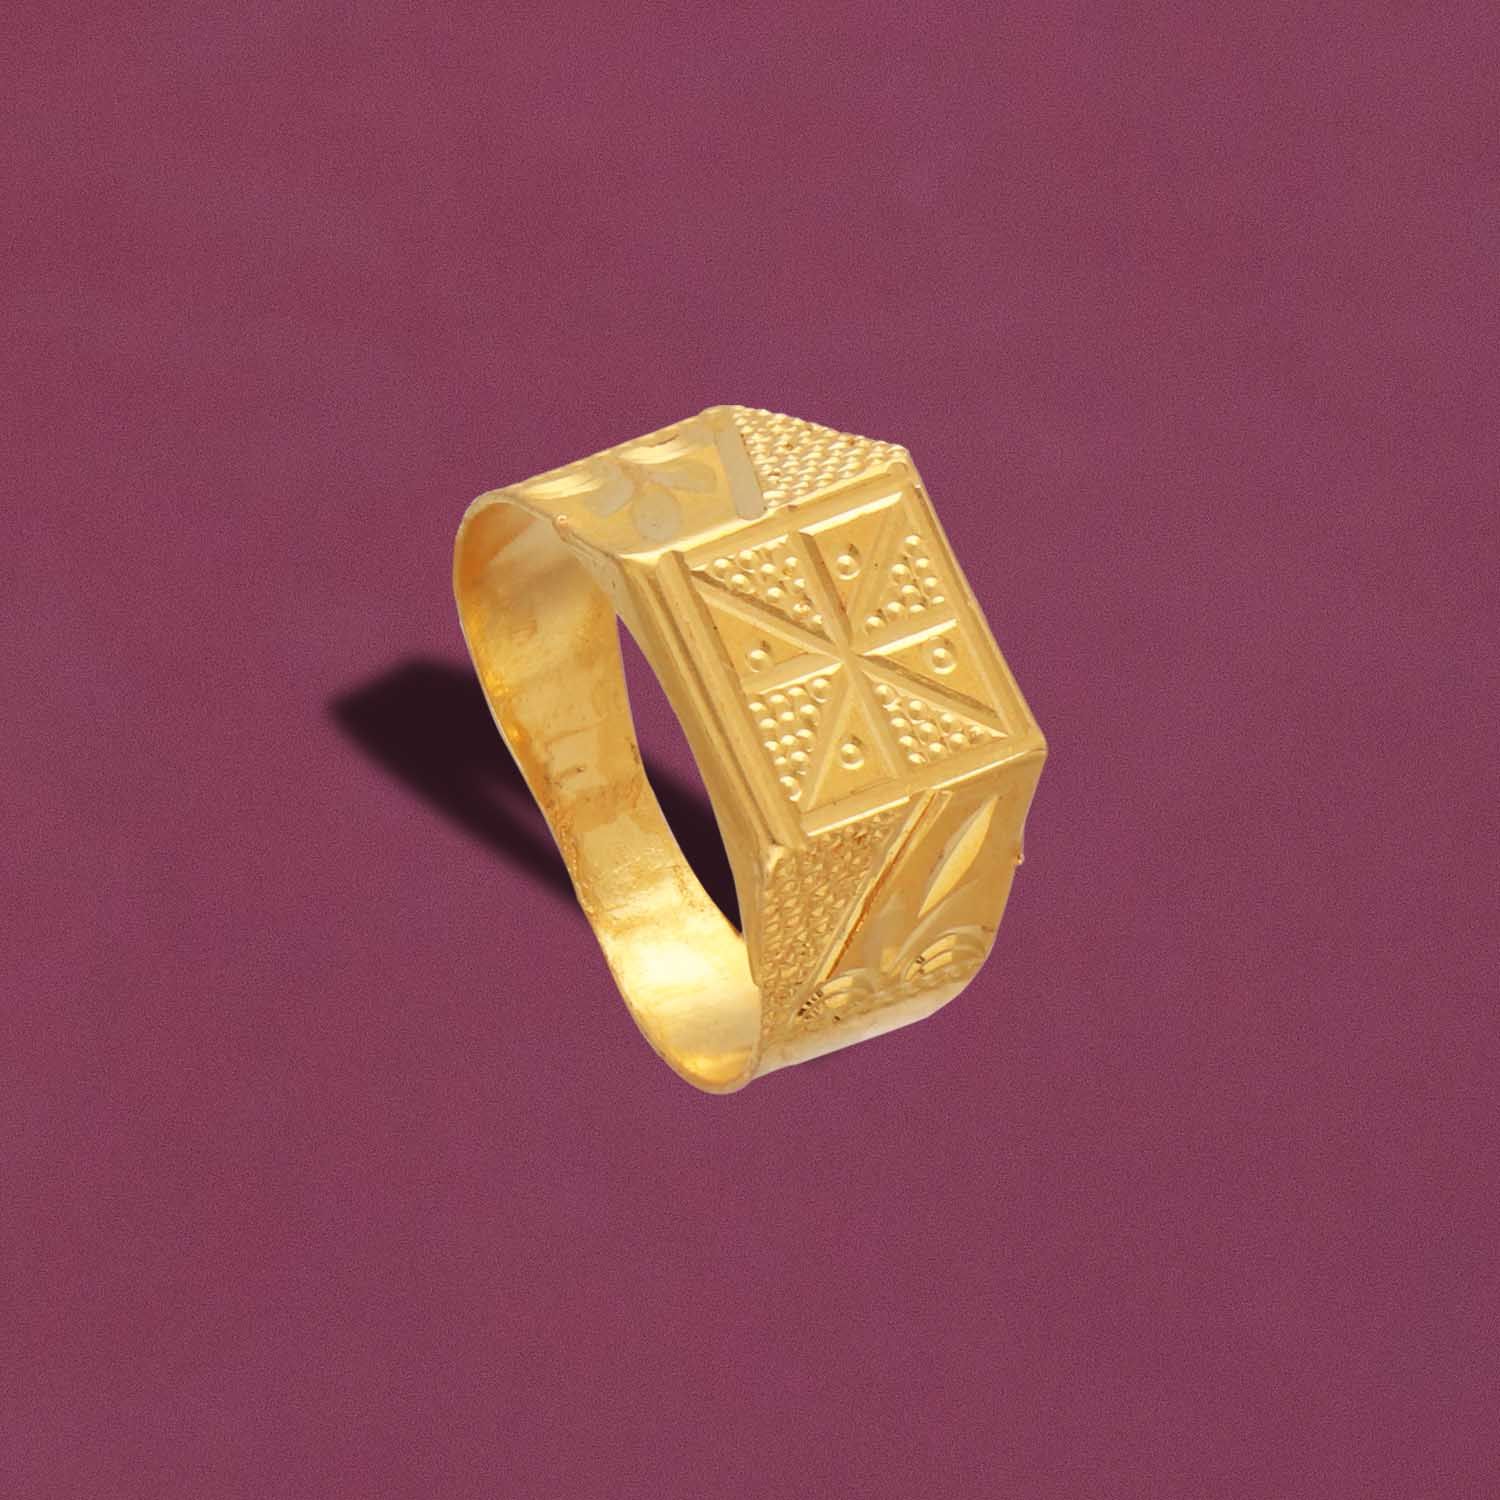 22kt simple square gold ring for kids 93vd7309 93vd7309